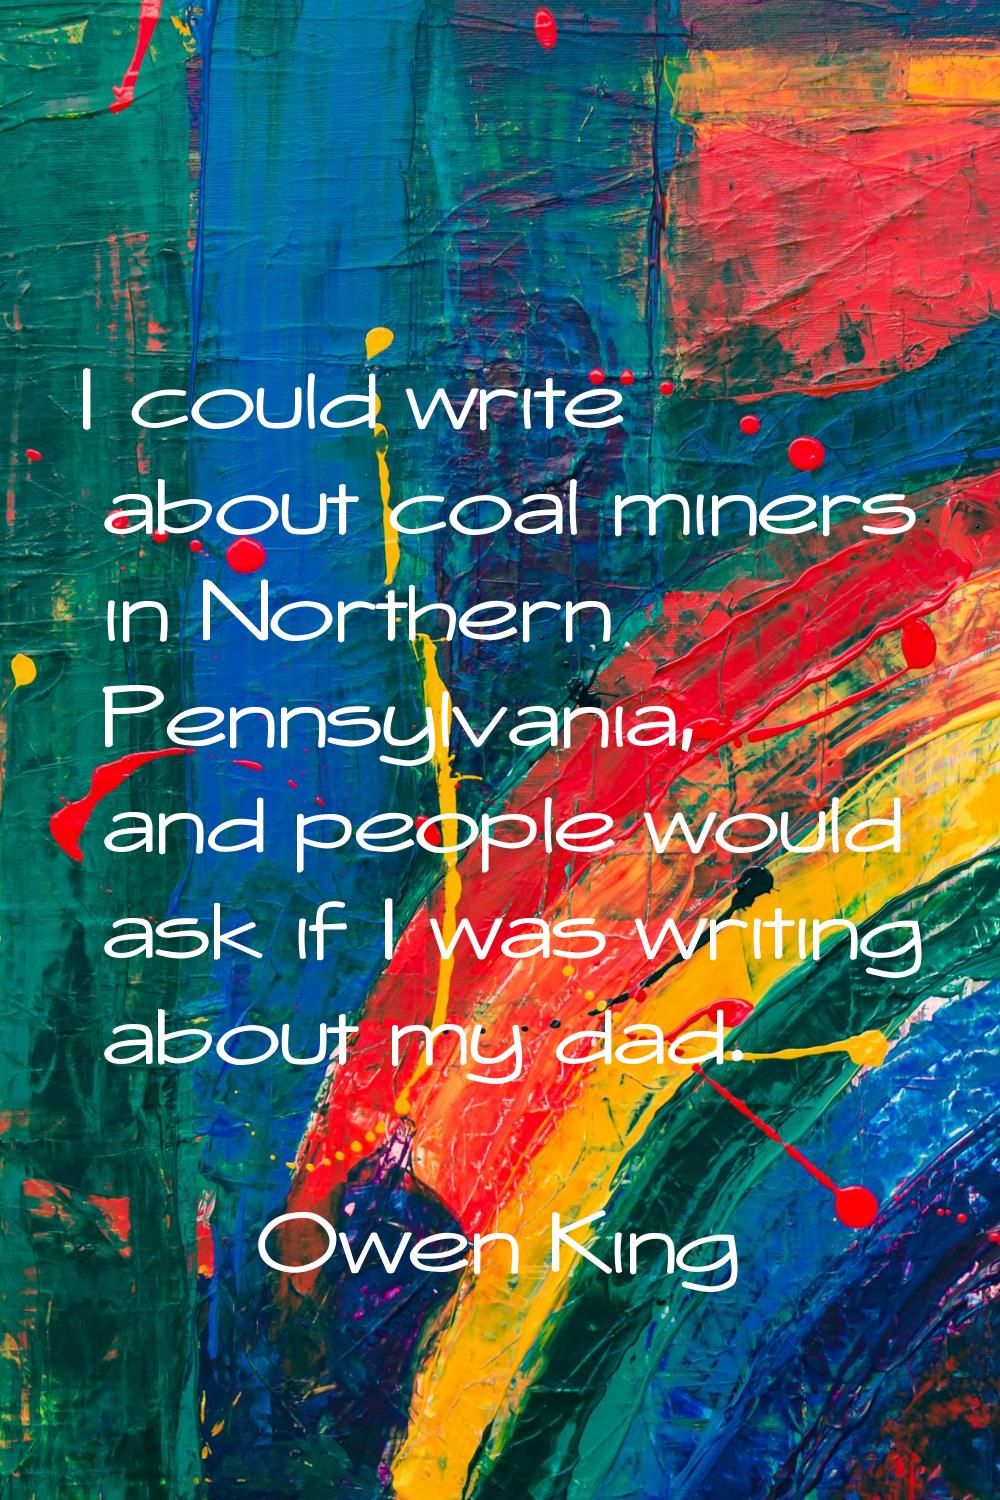 I could write about coal miners in Northern Pennsylvania, and people would ask if I was writing abo